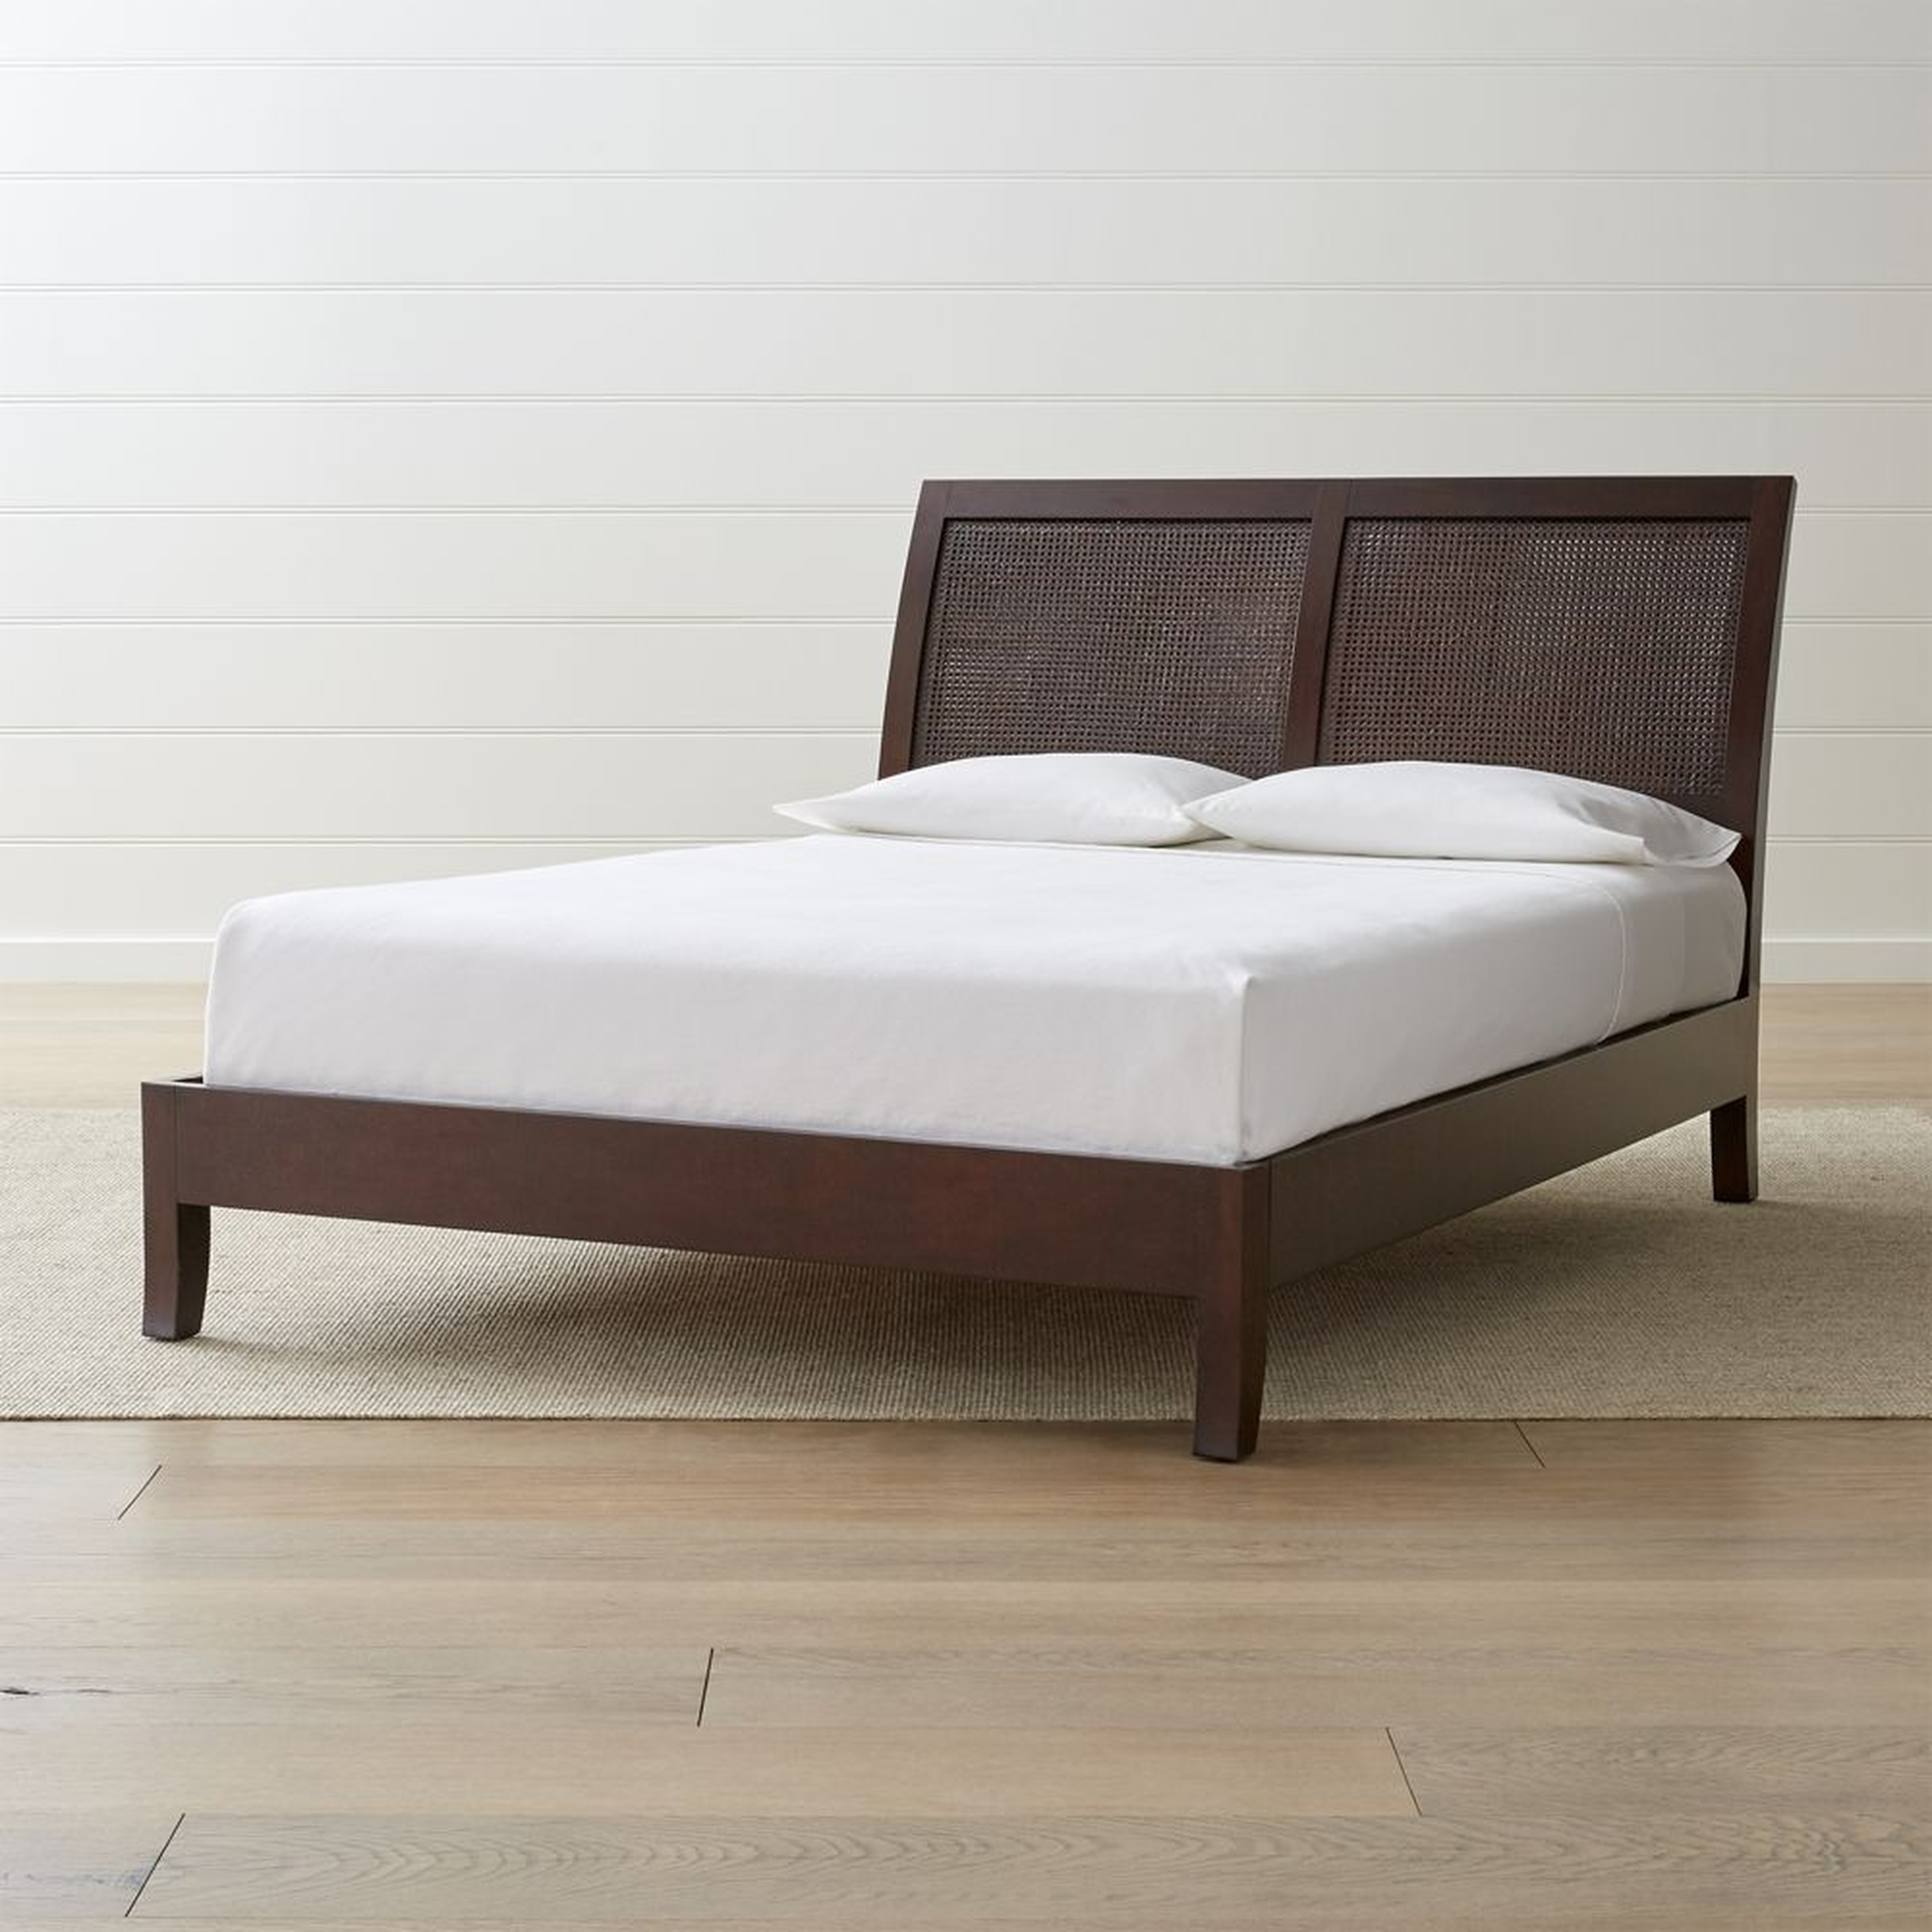 Dawson Clove Cane Queen Bed - Crate and Barrel